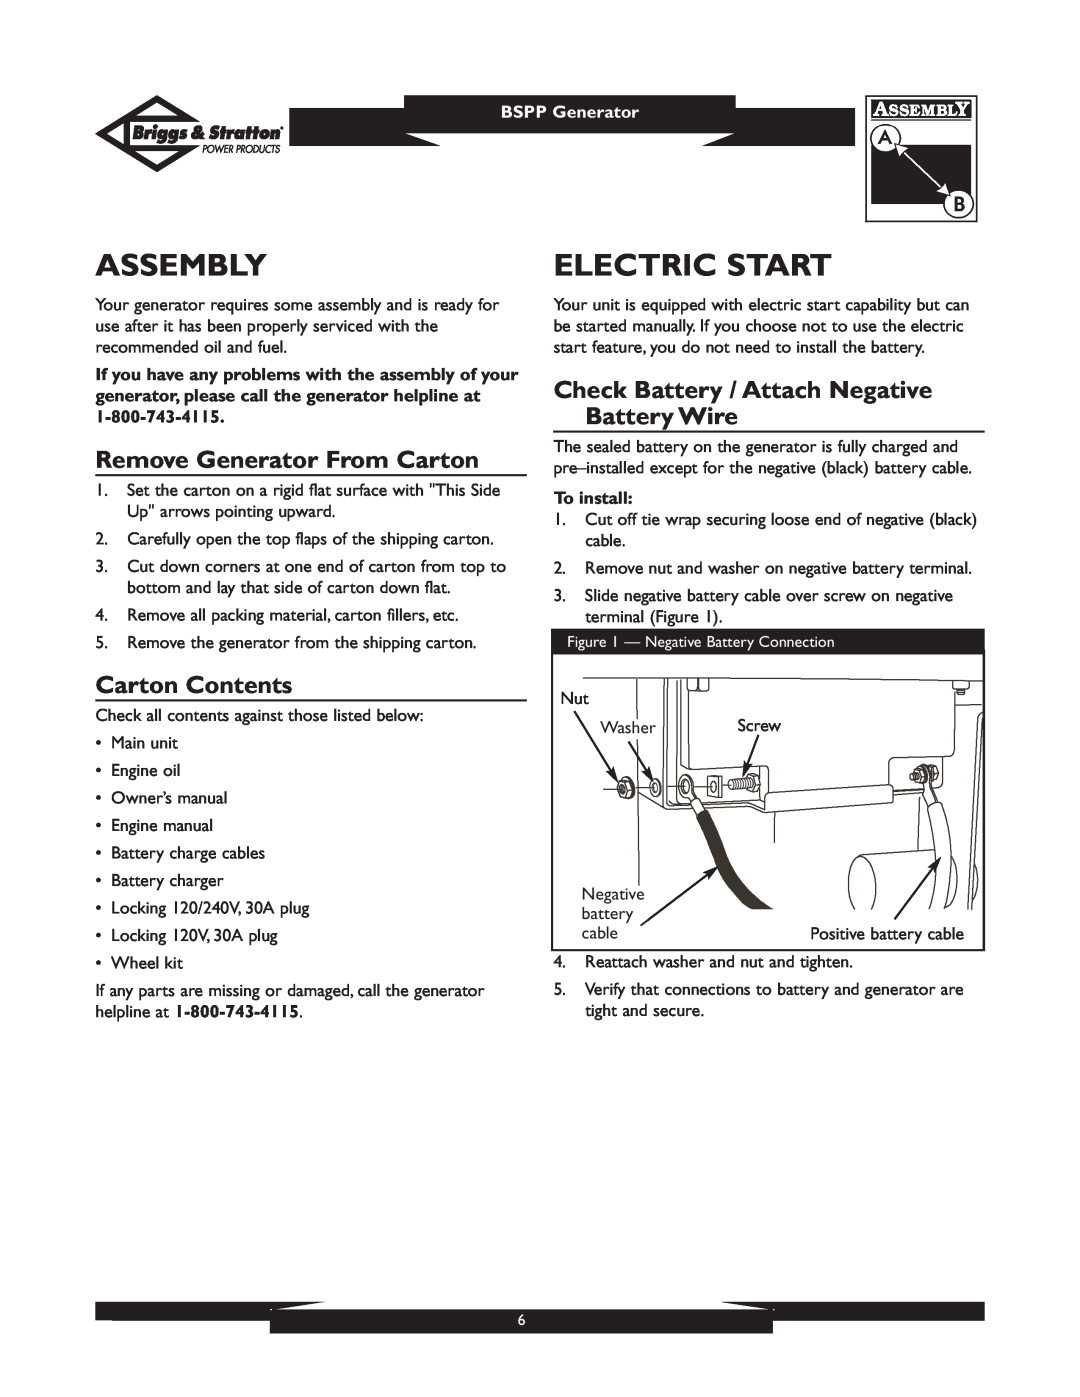 Briggs & Stratton PRO8000 owner manual Assembly, Electric Start, Remove Generator From Carton, Carton Contents, To install 